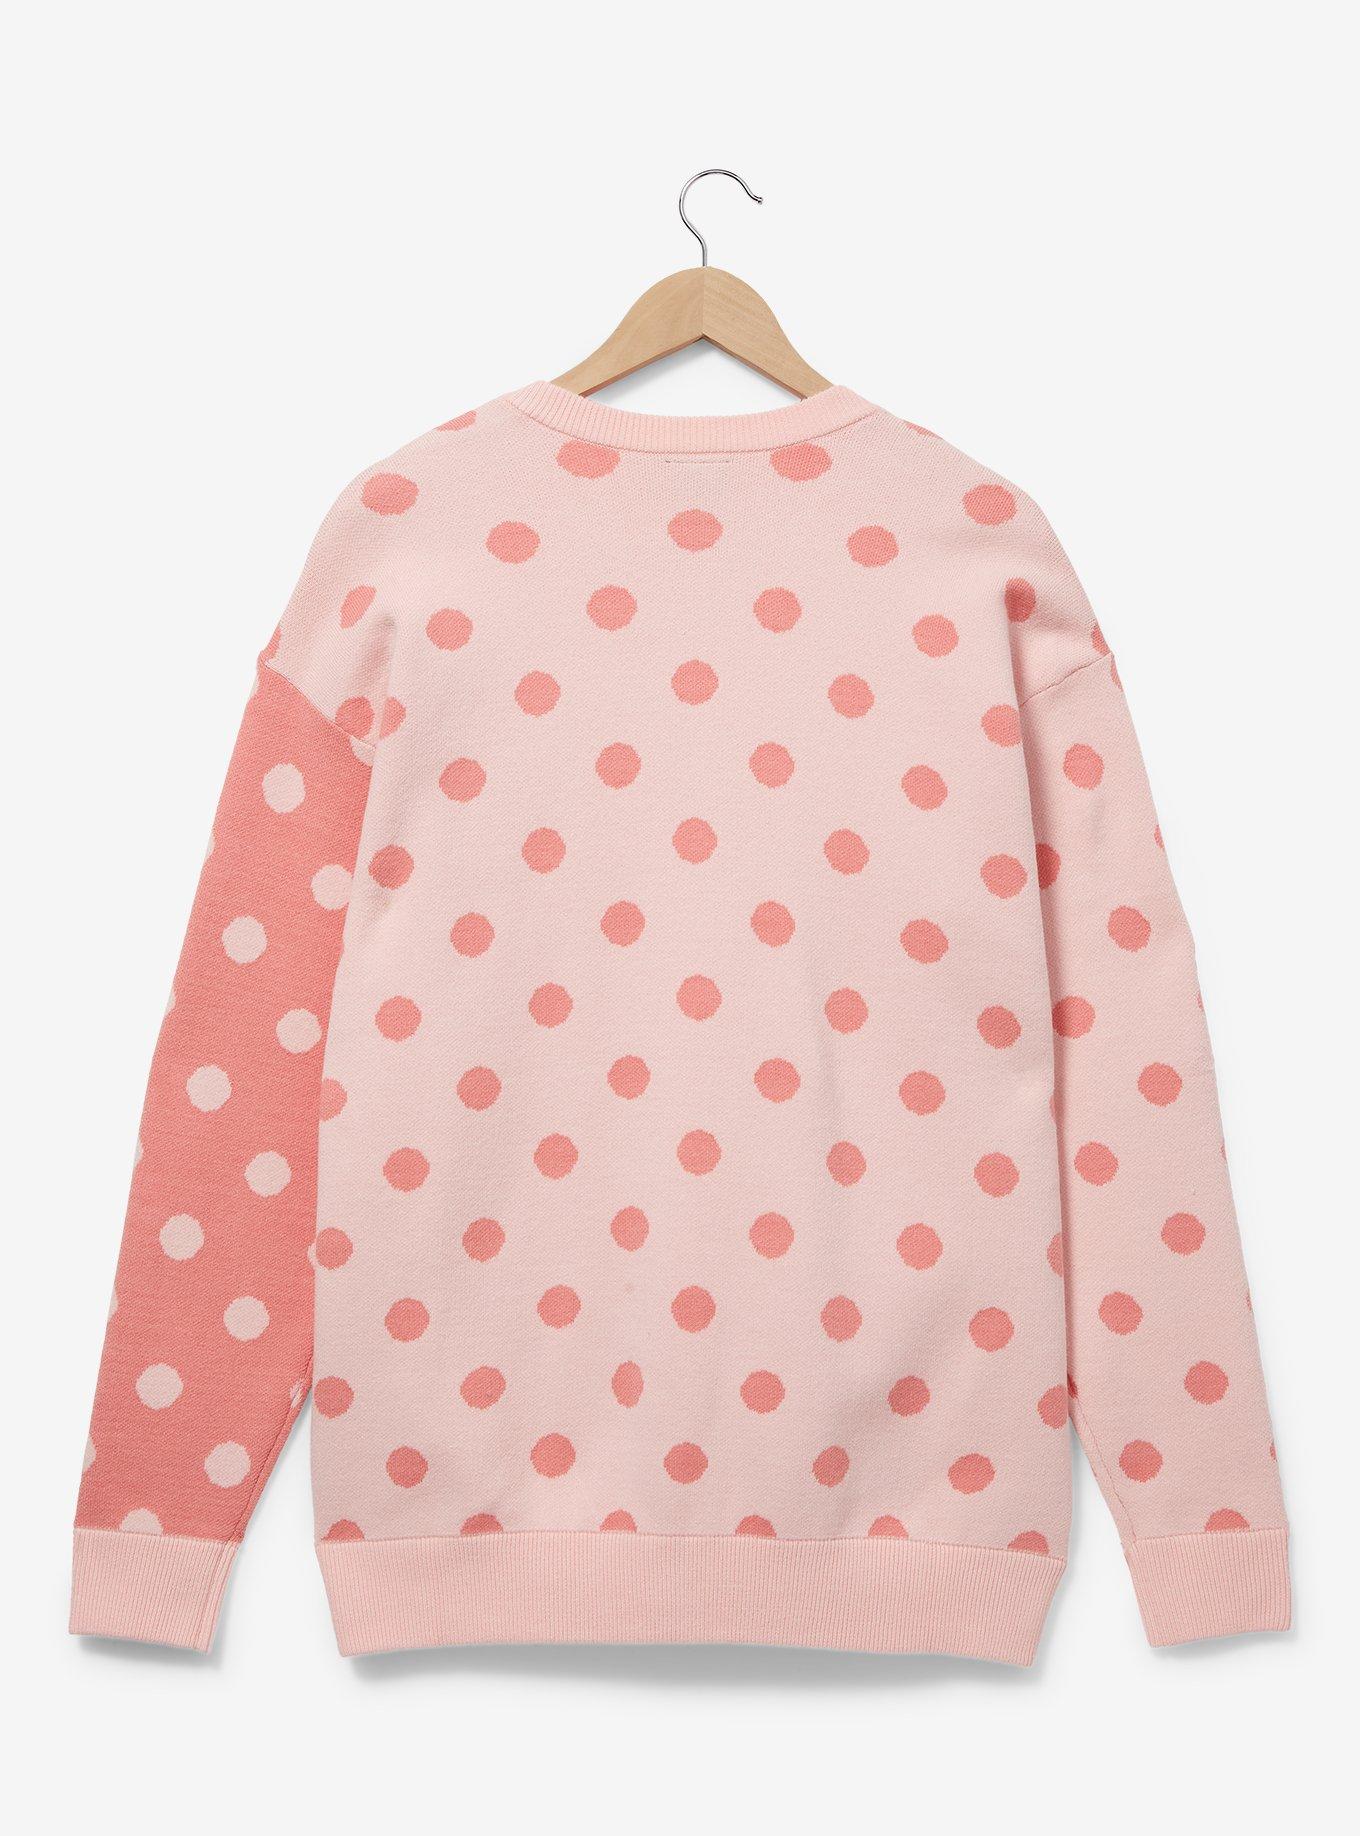 Disney Minnie Mouse Polka Dot Women's Cardigan - BoxLunch Exclusive, PINK, alternate